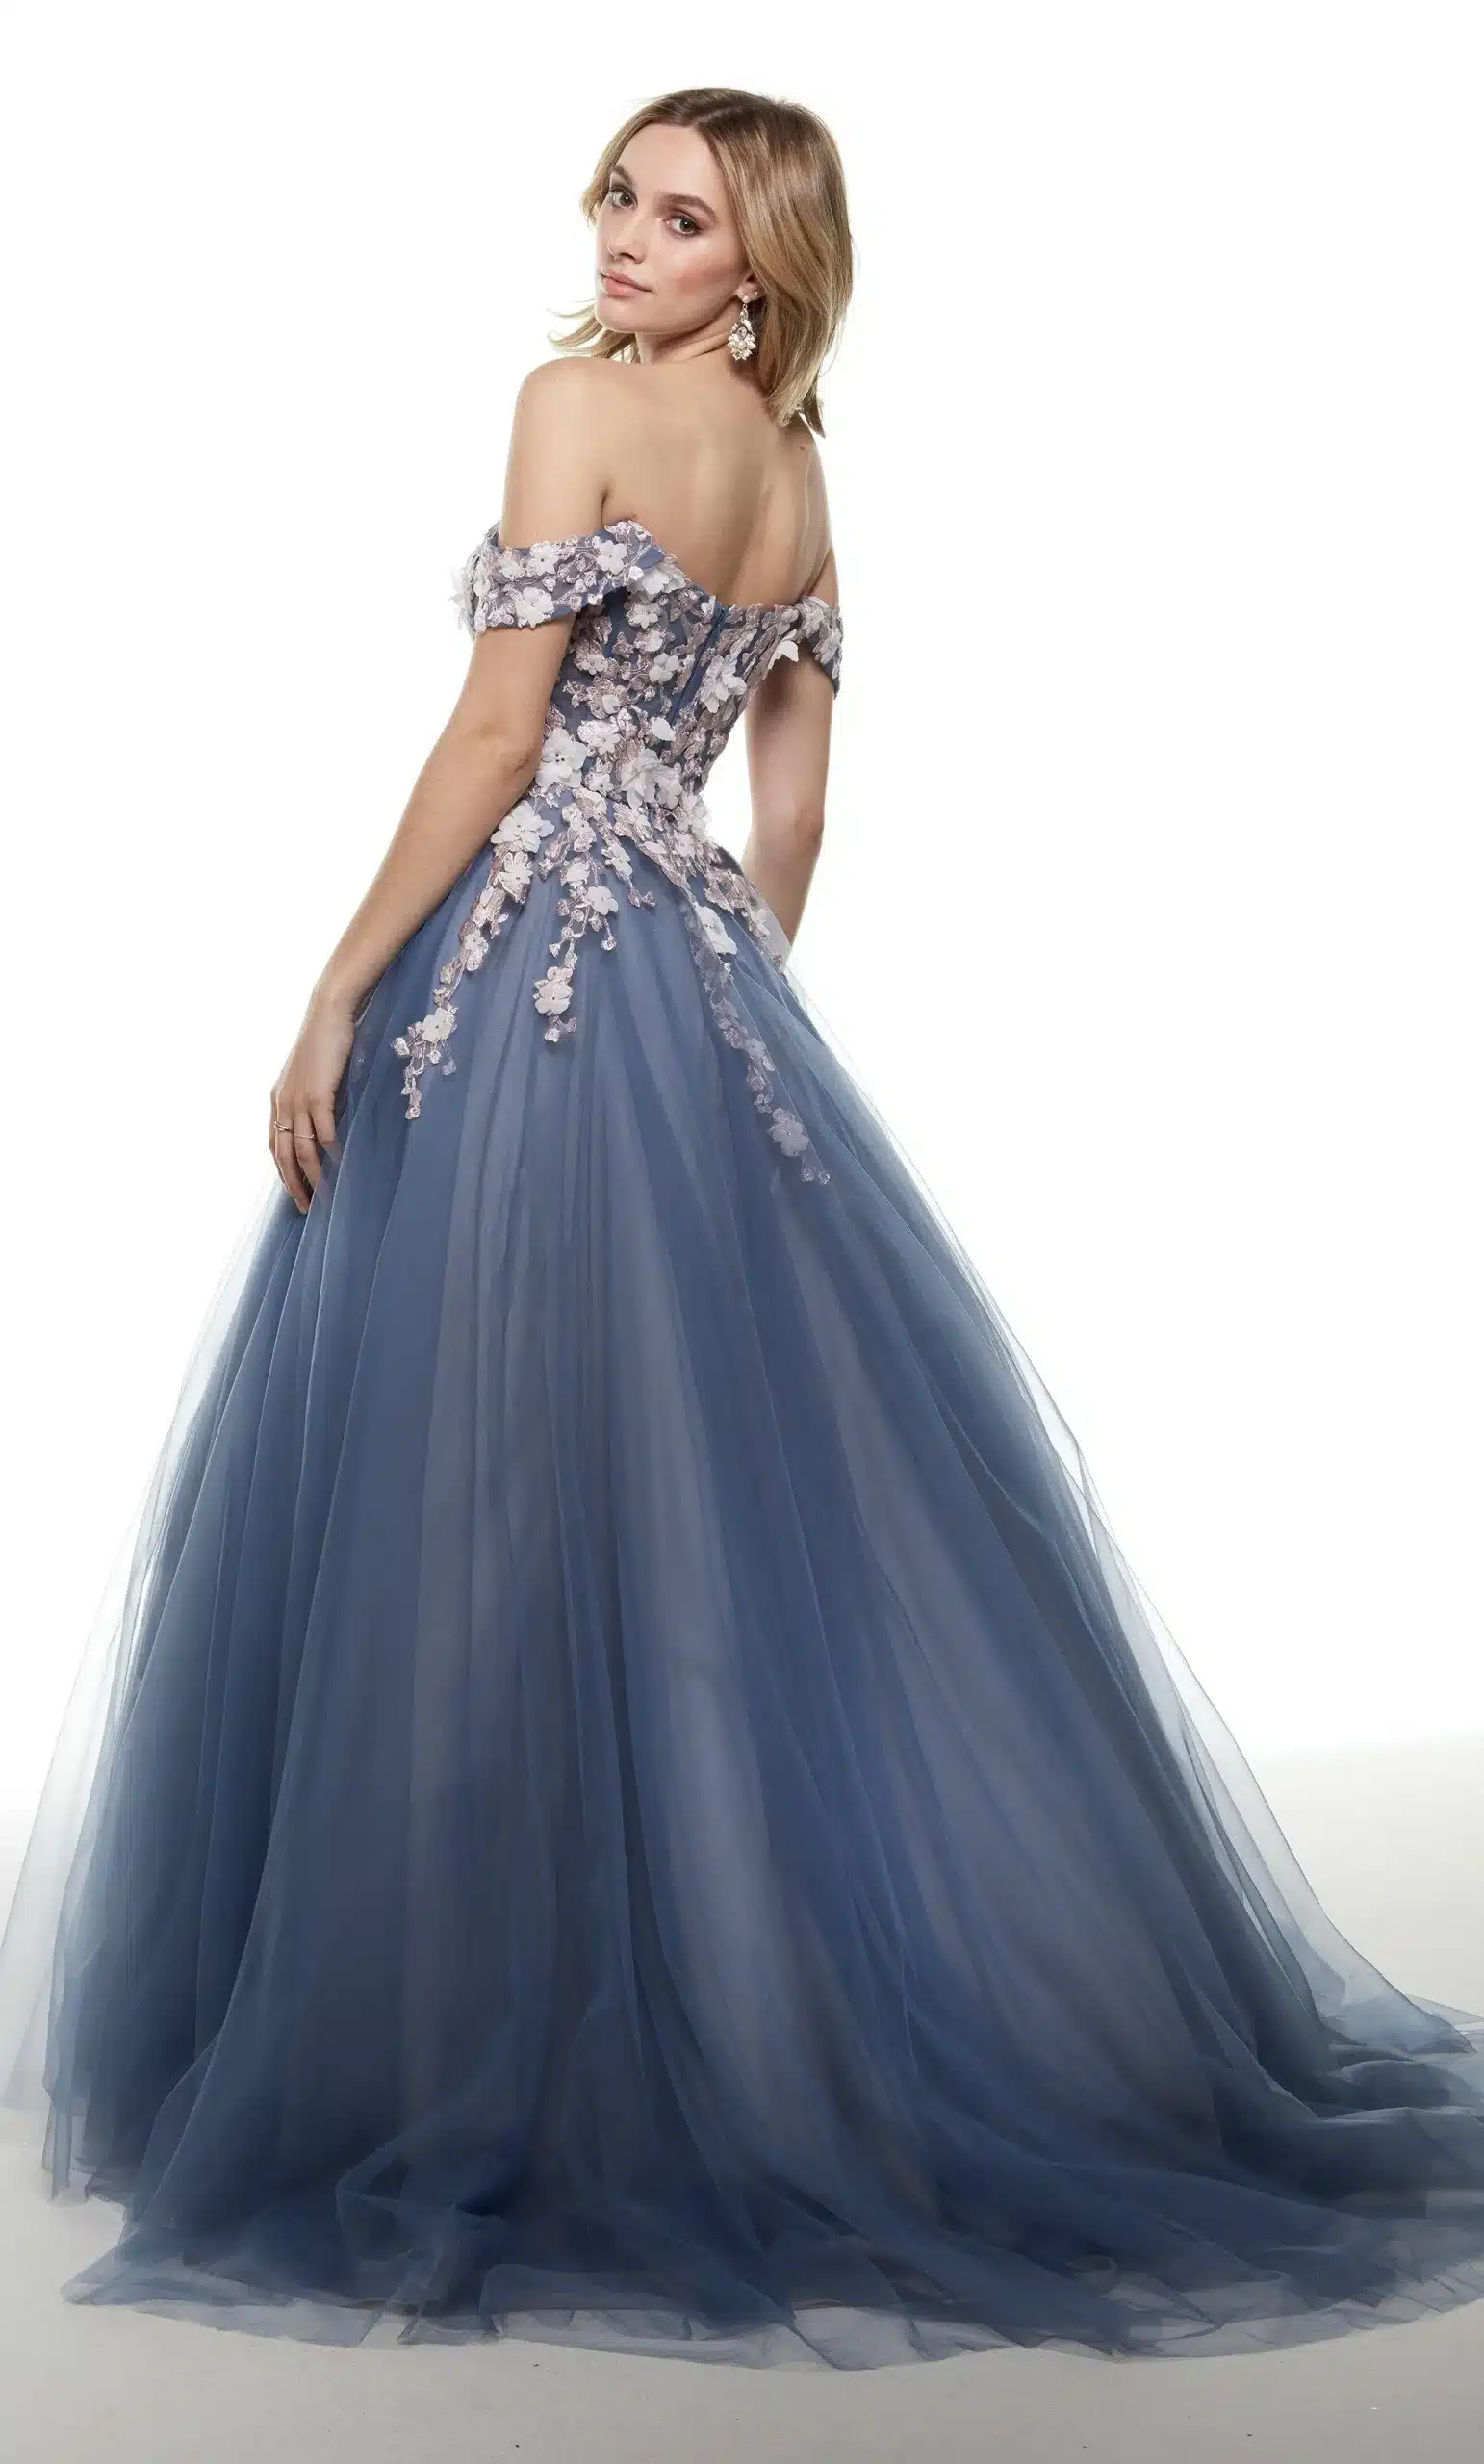 Strapless Floral Tulle Ball Dress with Detachable Shawl